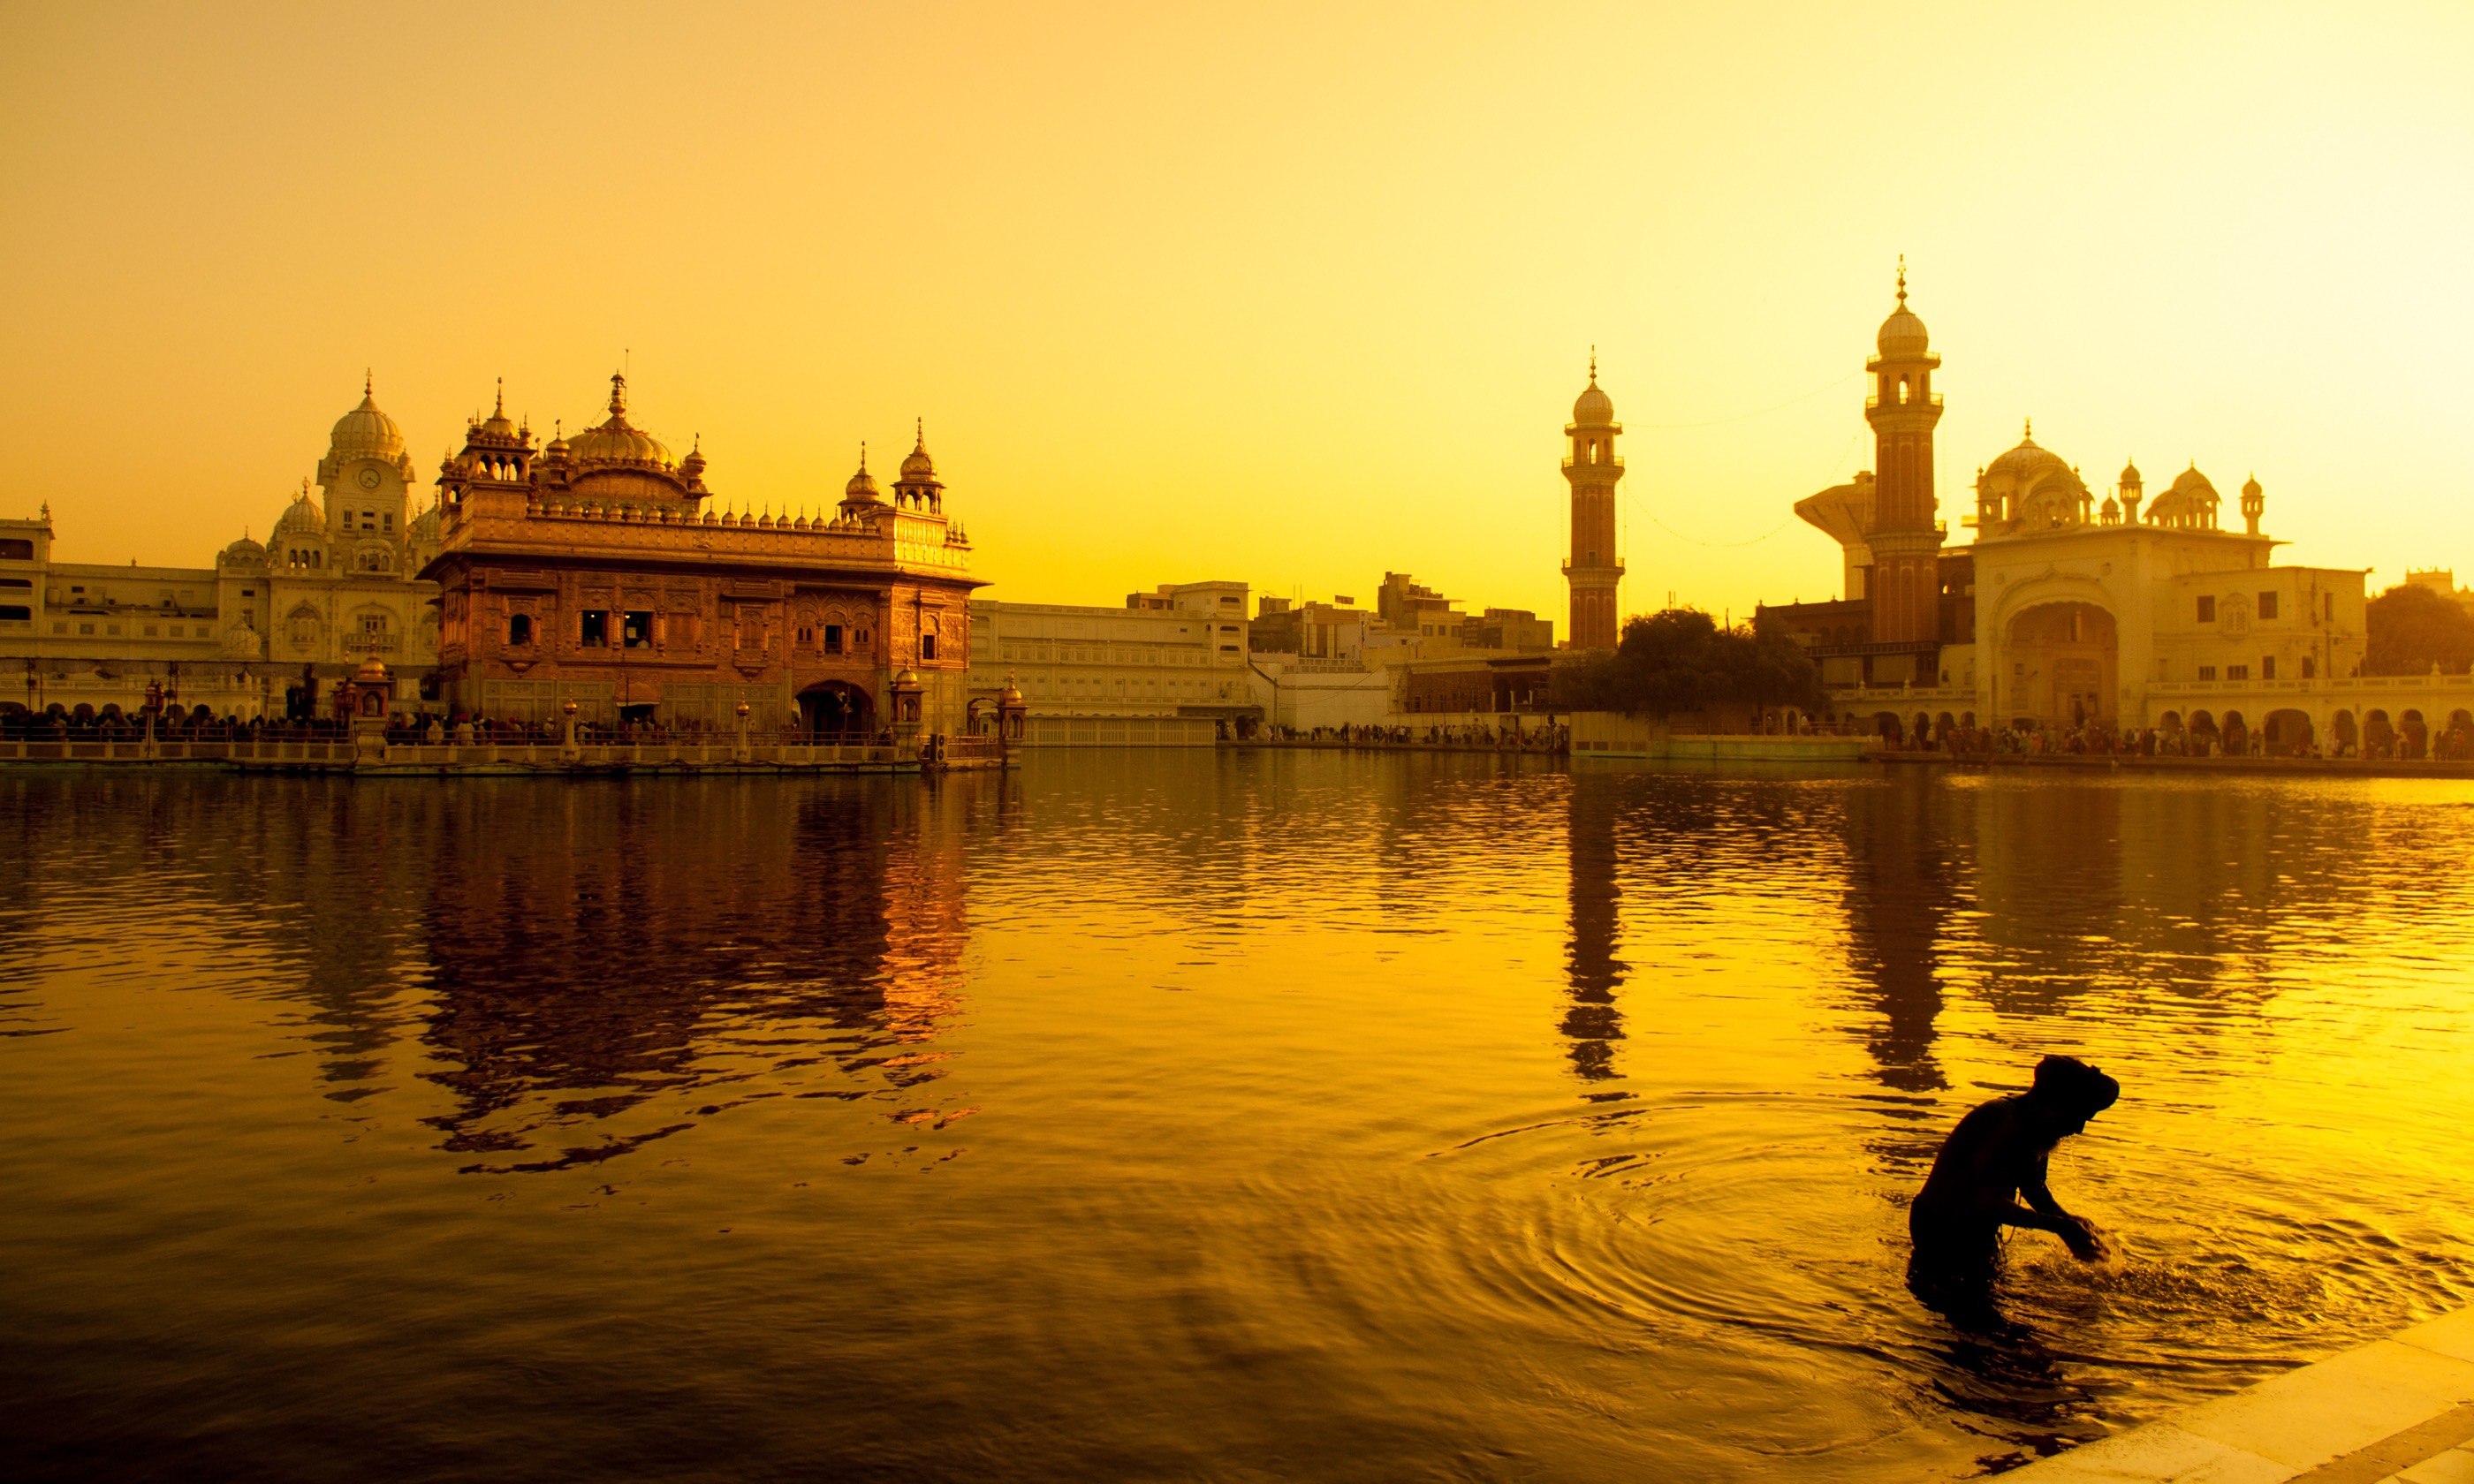 Sunset at the Golden Temple in Amritsar (Shutterstock.com. See main credit below)